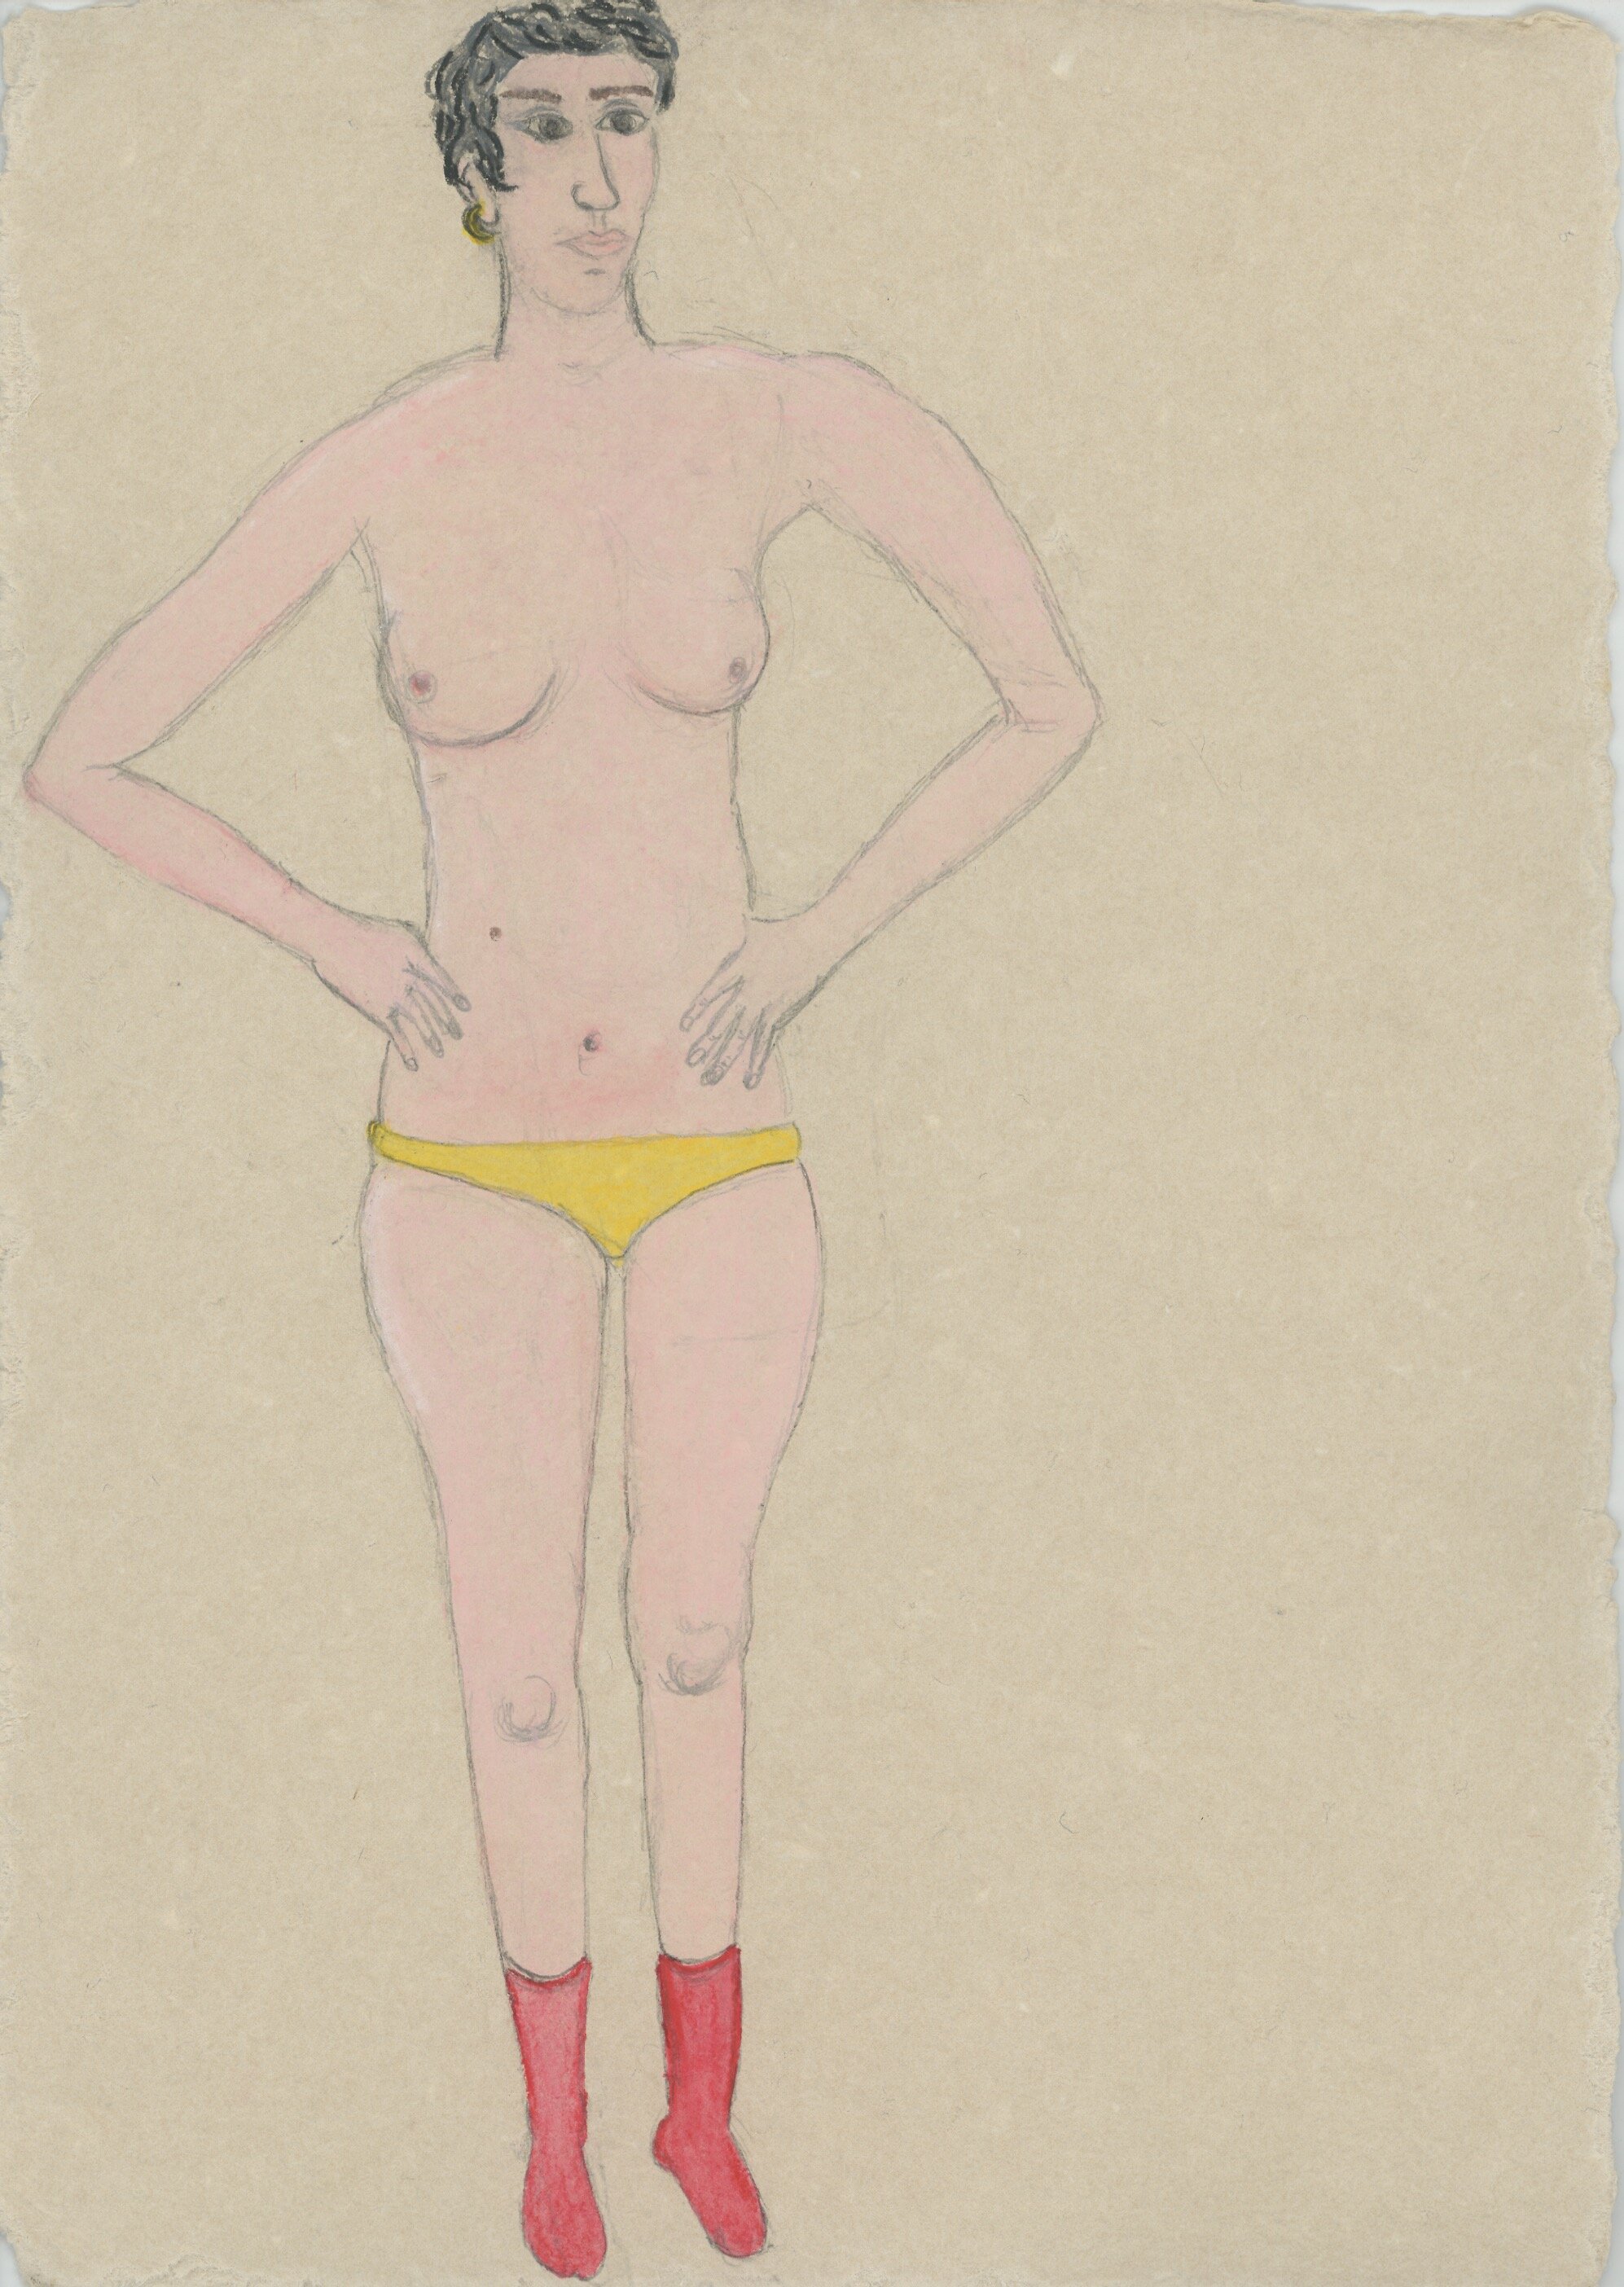 Half-naked woman with red socks and yellow panties, 25.5 x 30 cm, 2019